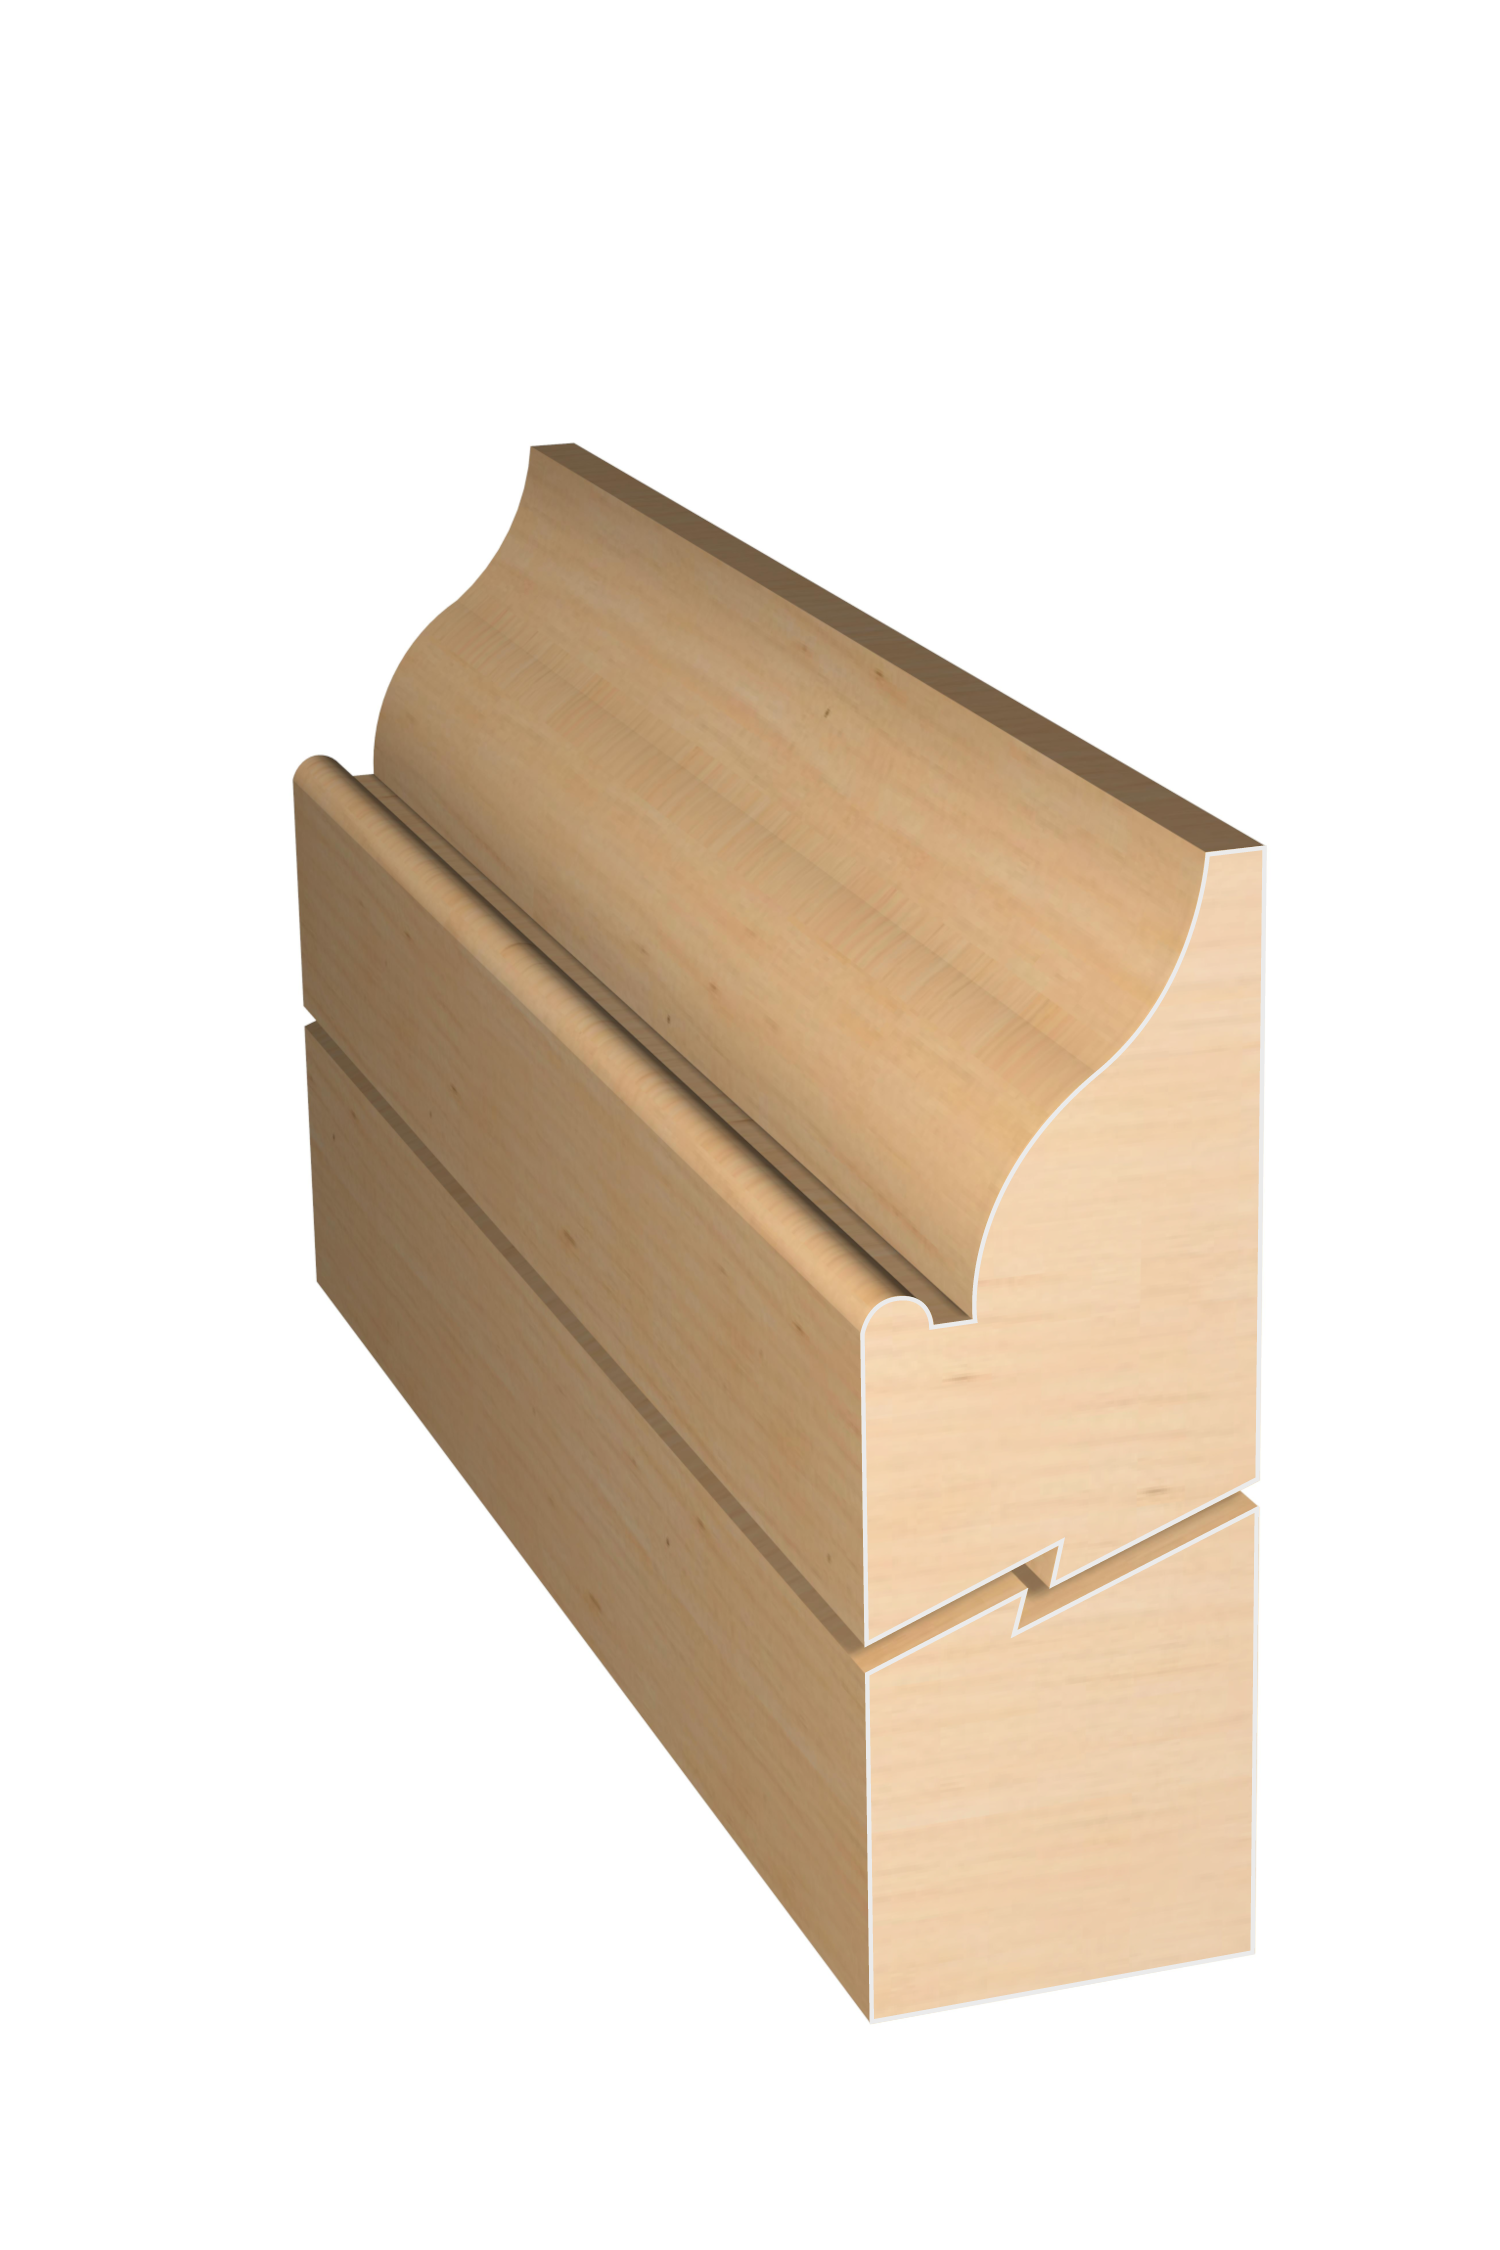 Three dimensional rendering of custom edge profile wood molding SKPL44 made by Public Lumber Company in Detroit.